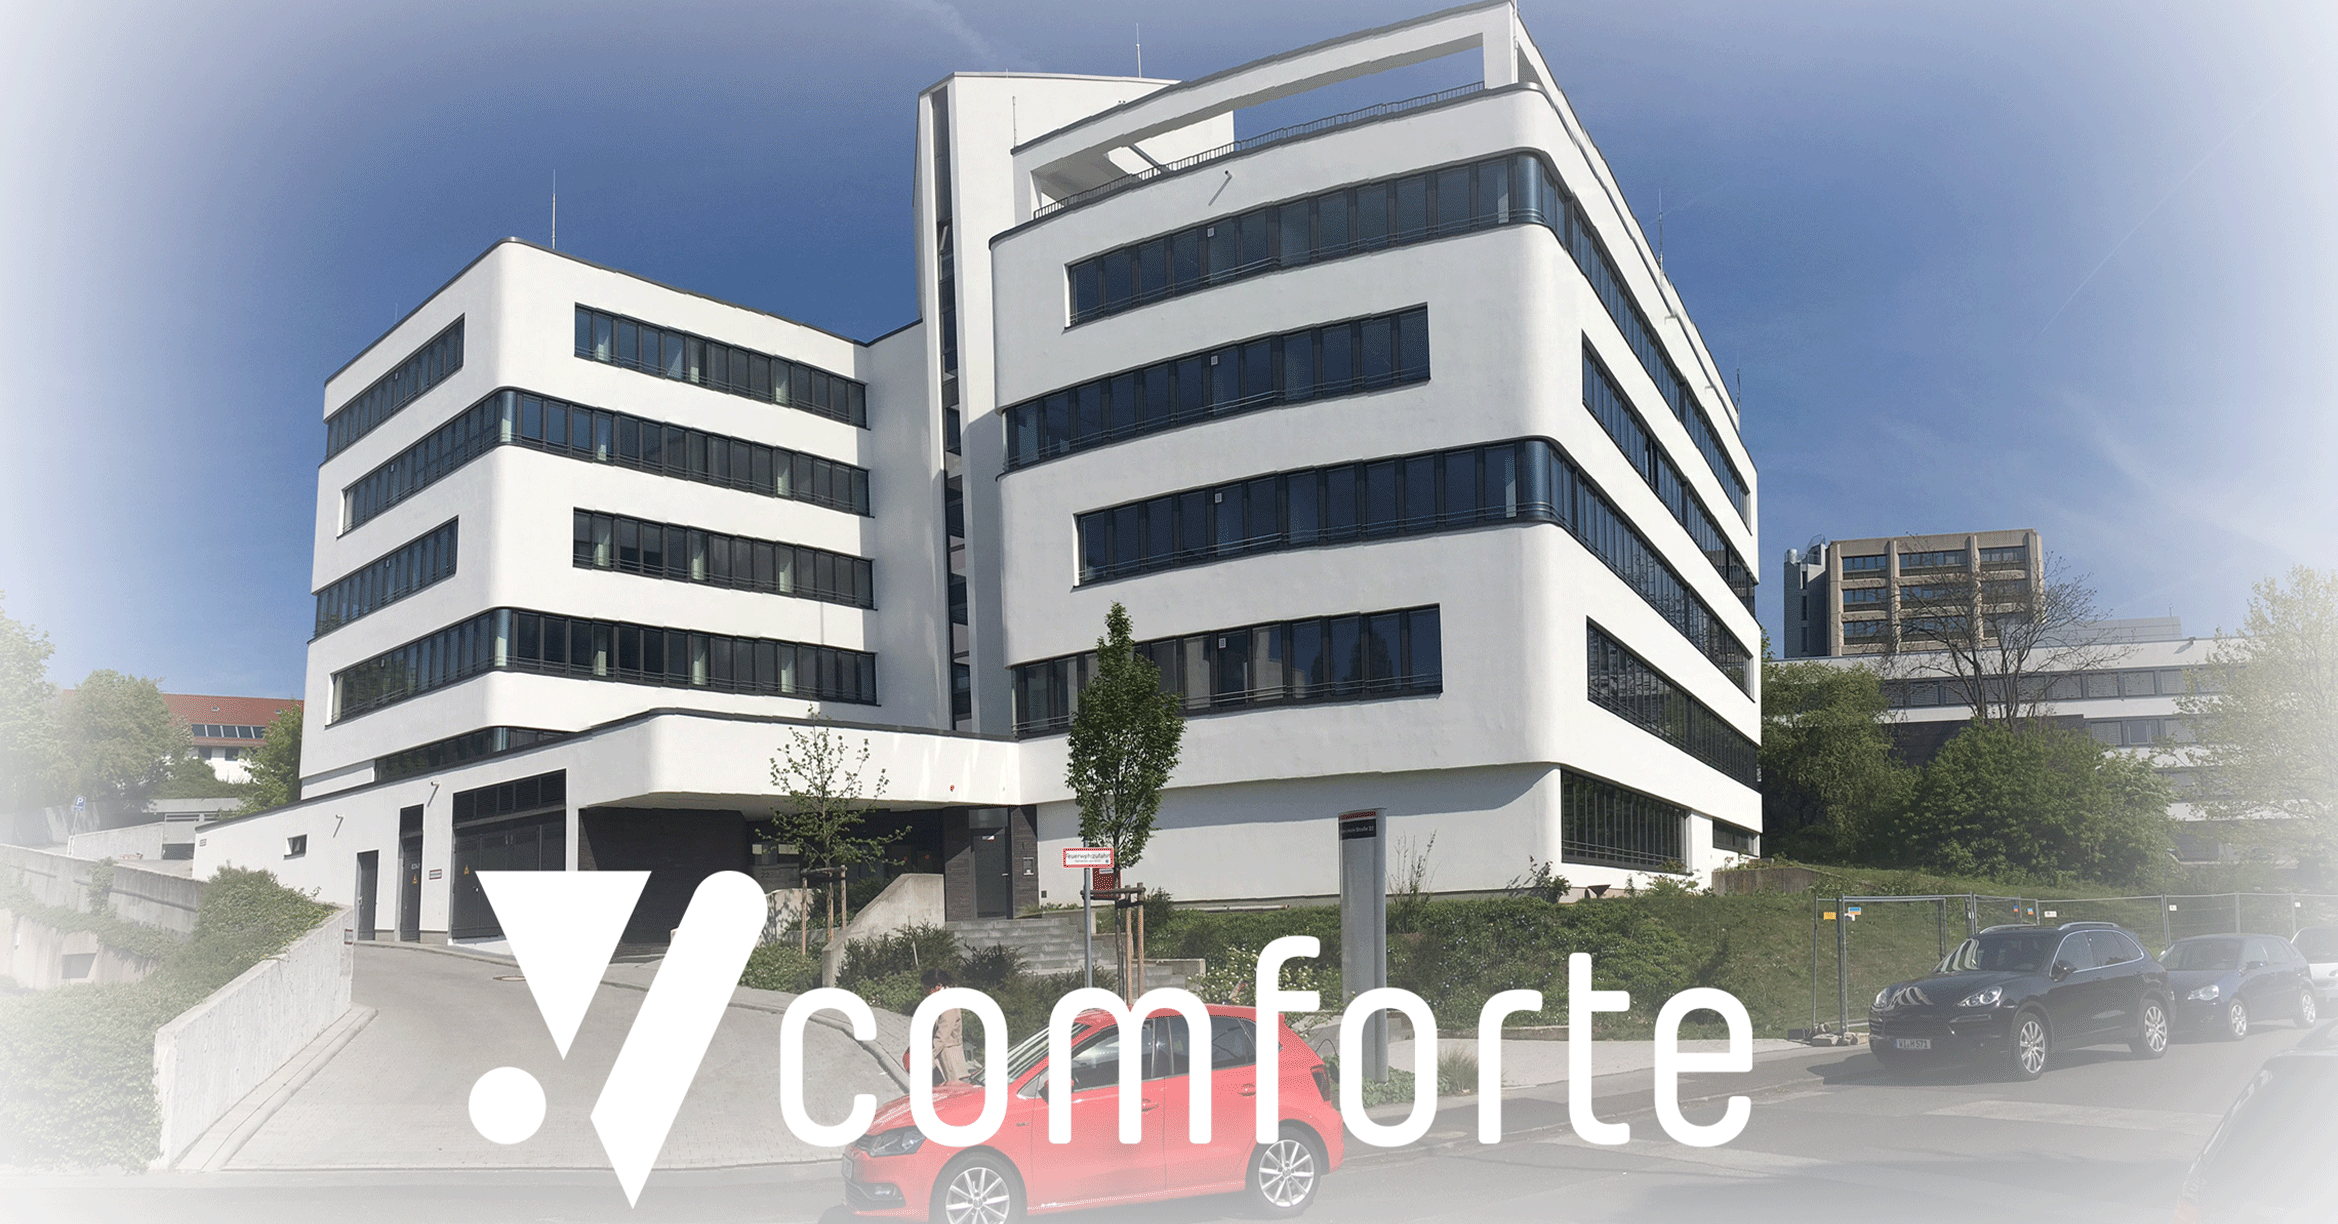 comforte AG Joins the AWS Partner Network Member, Provides Joint Customers with Data-Centric Security